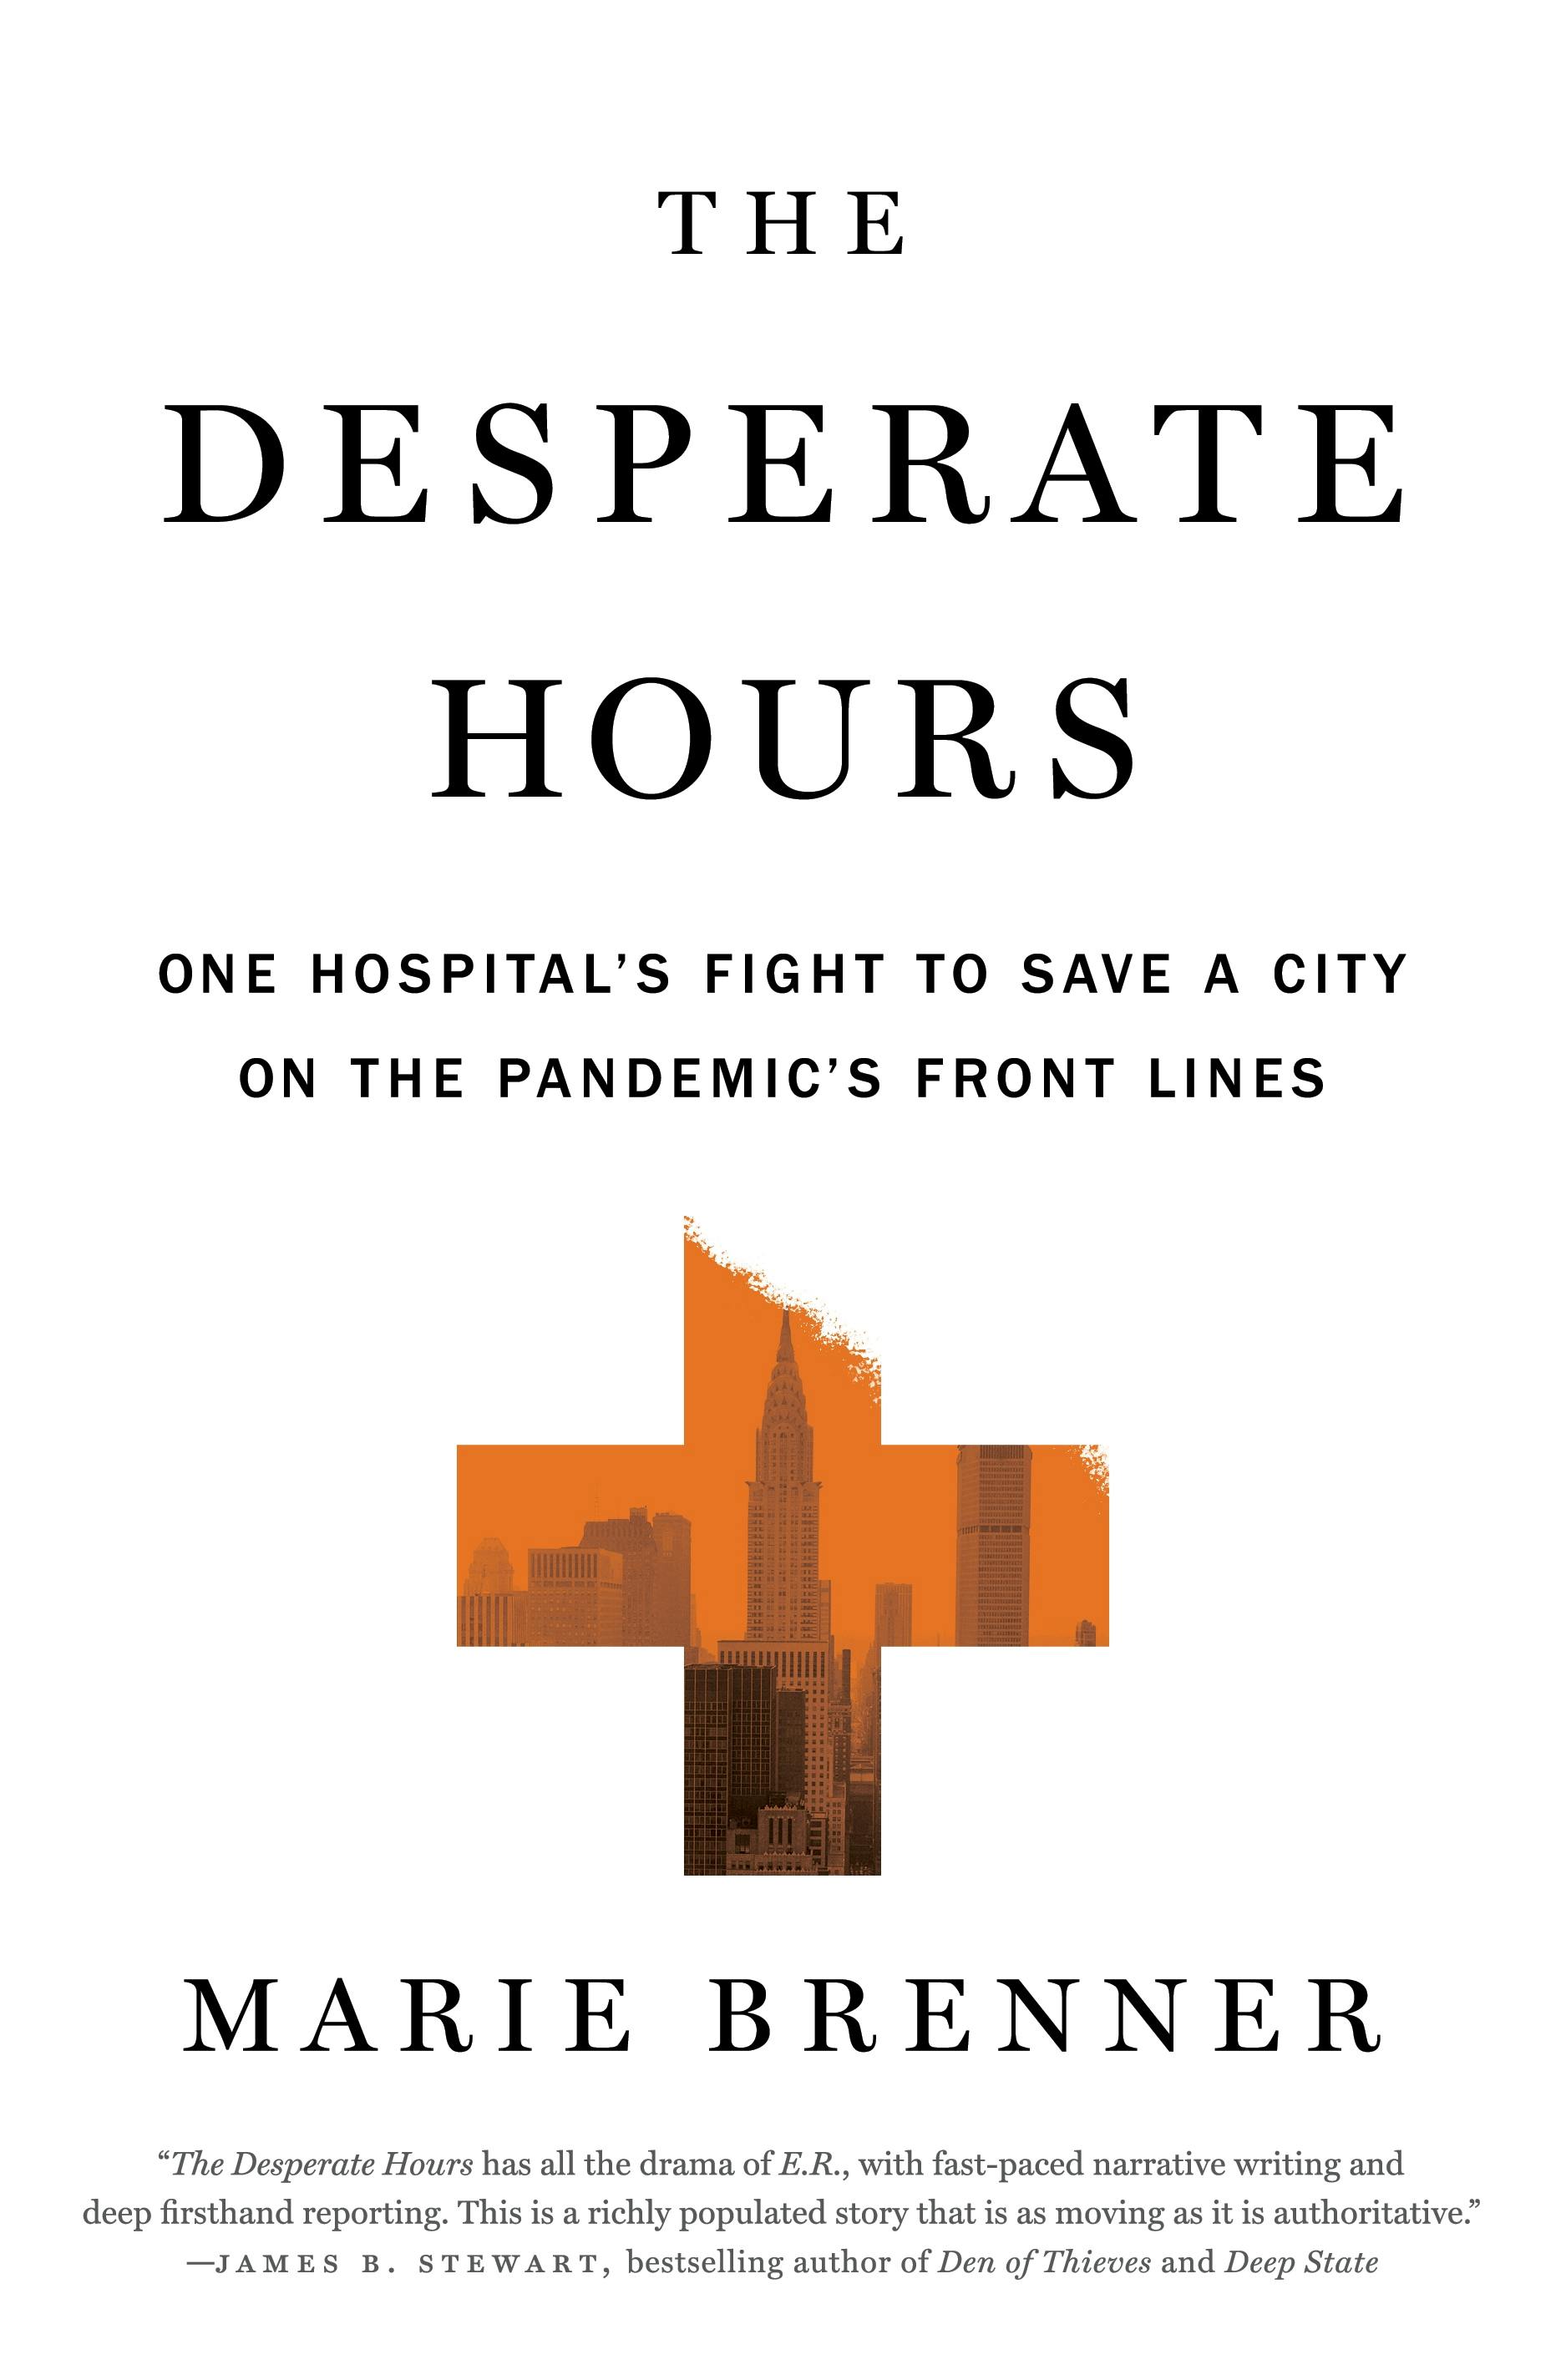 Voices from the Front Lines of the Pandemic